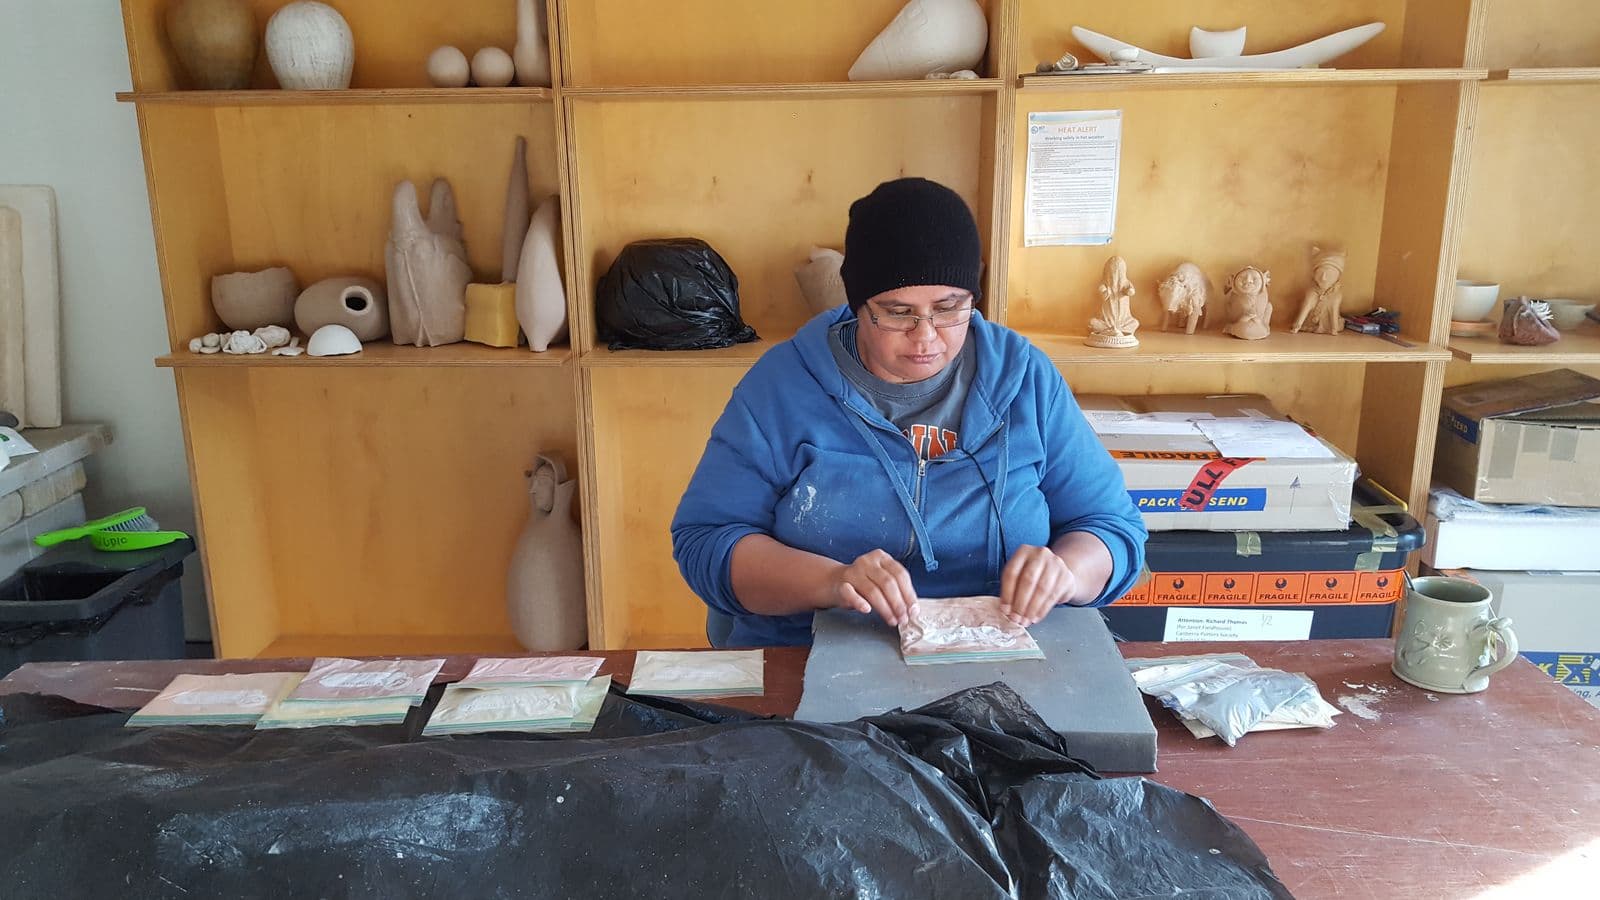 Photograph of Janet Fieldhouse seated in her studio, working on her ceramic pieces